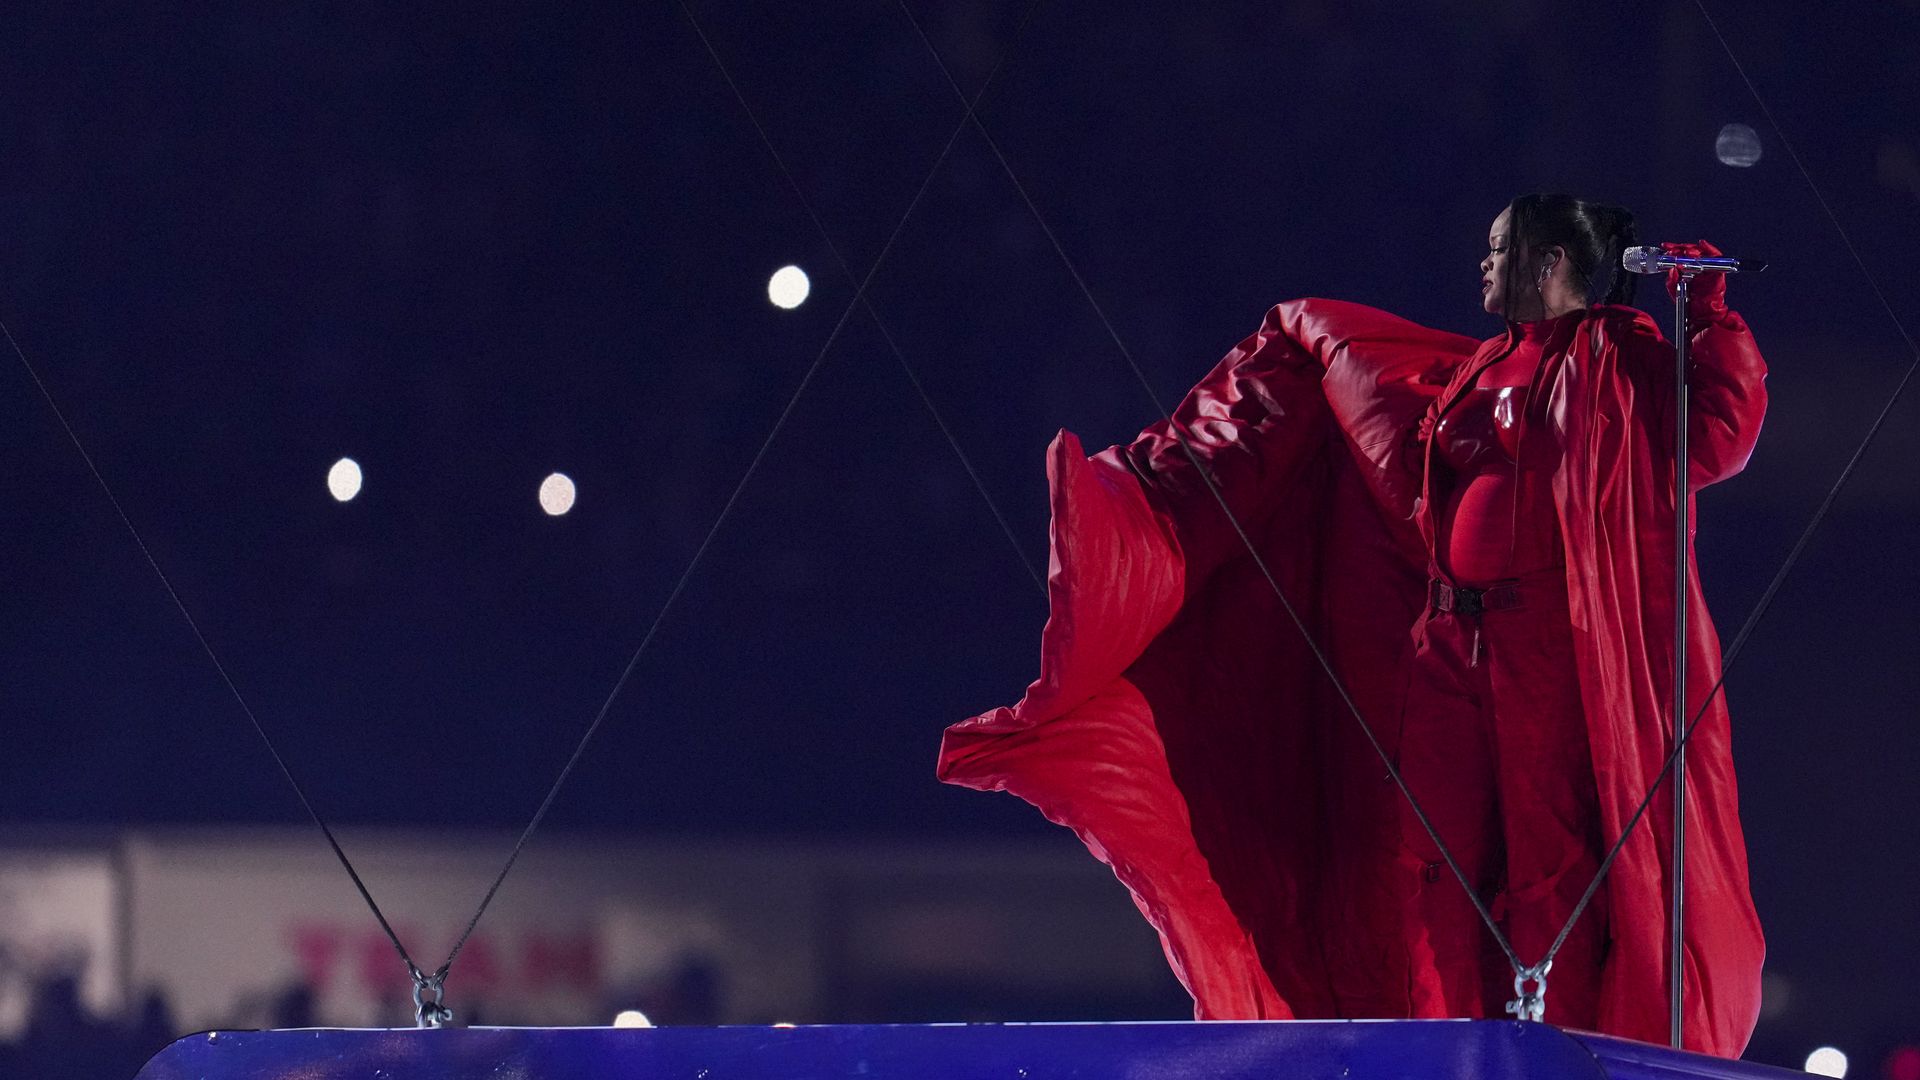 Rihanna, wearing all red, waves her coat during the Super Bowl halftime.